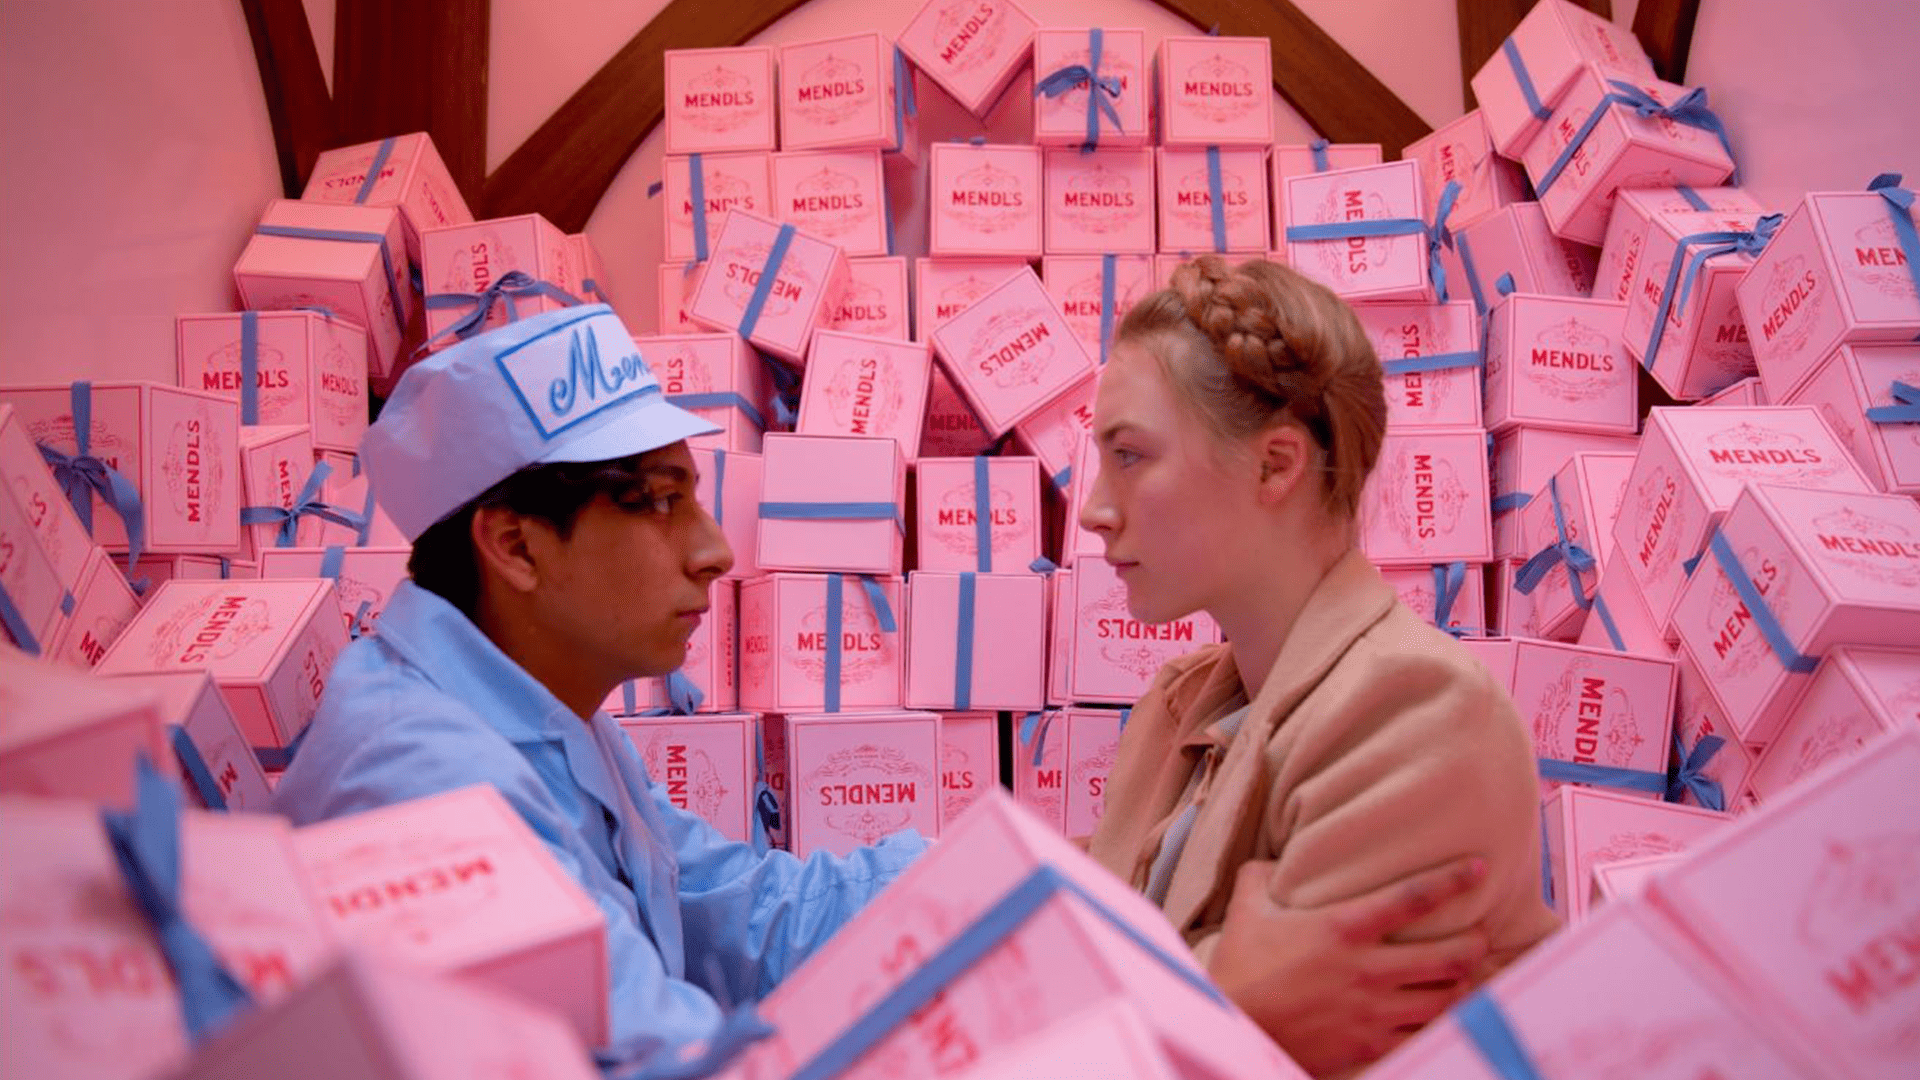 Tony Revolori and Saoirse Ronan sit in a pile of pink Mendl’s Bakery boxes in this image from Indian Paintbrush